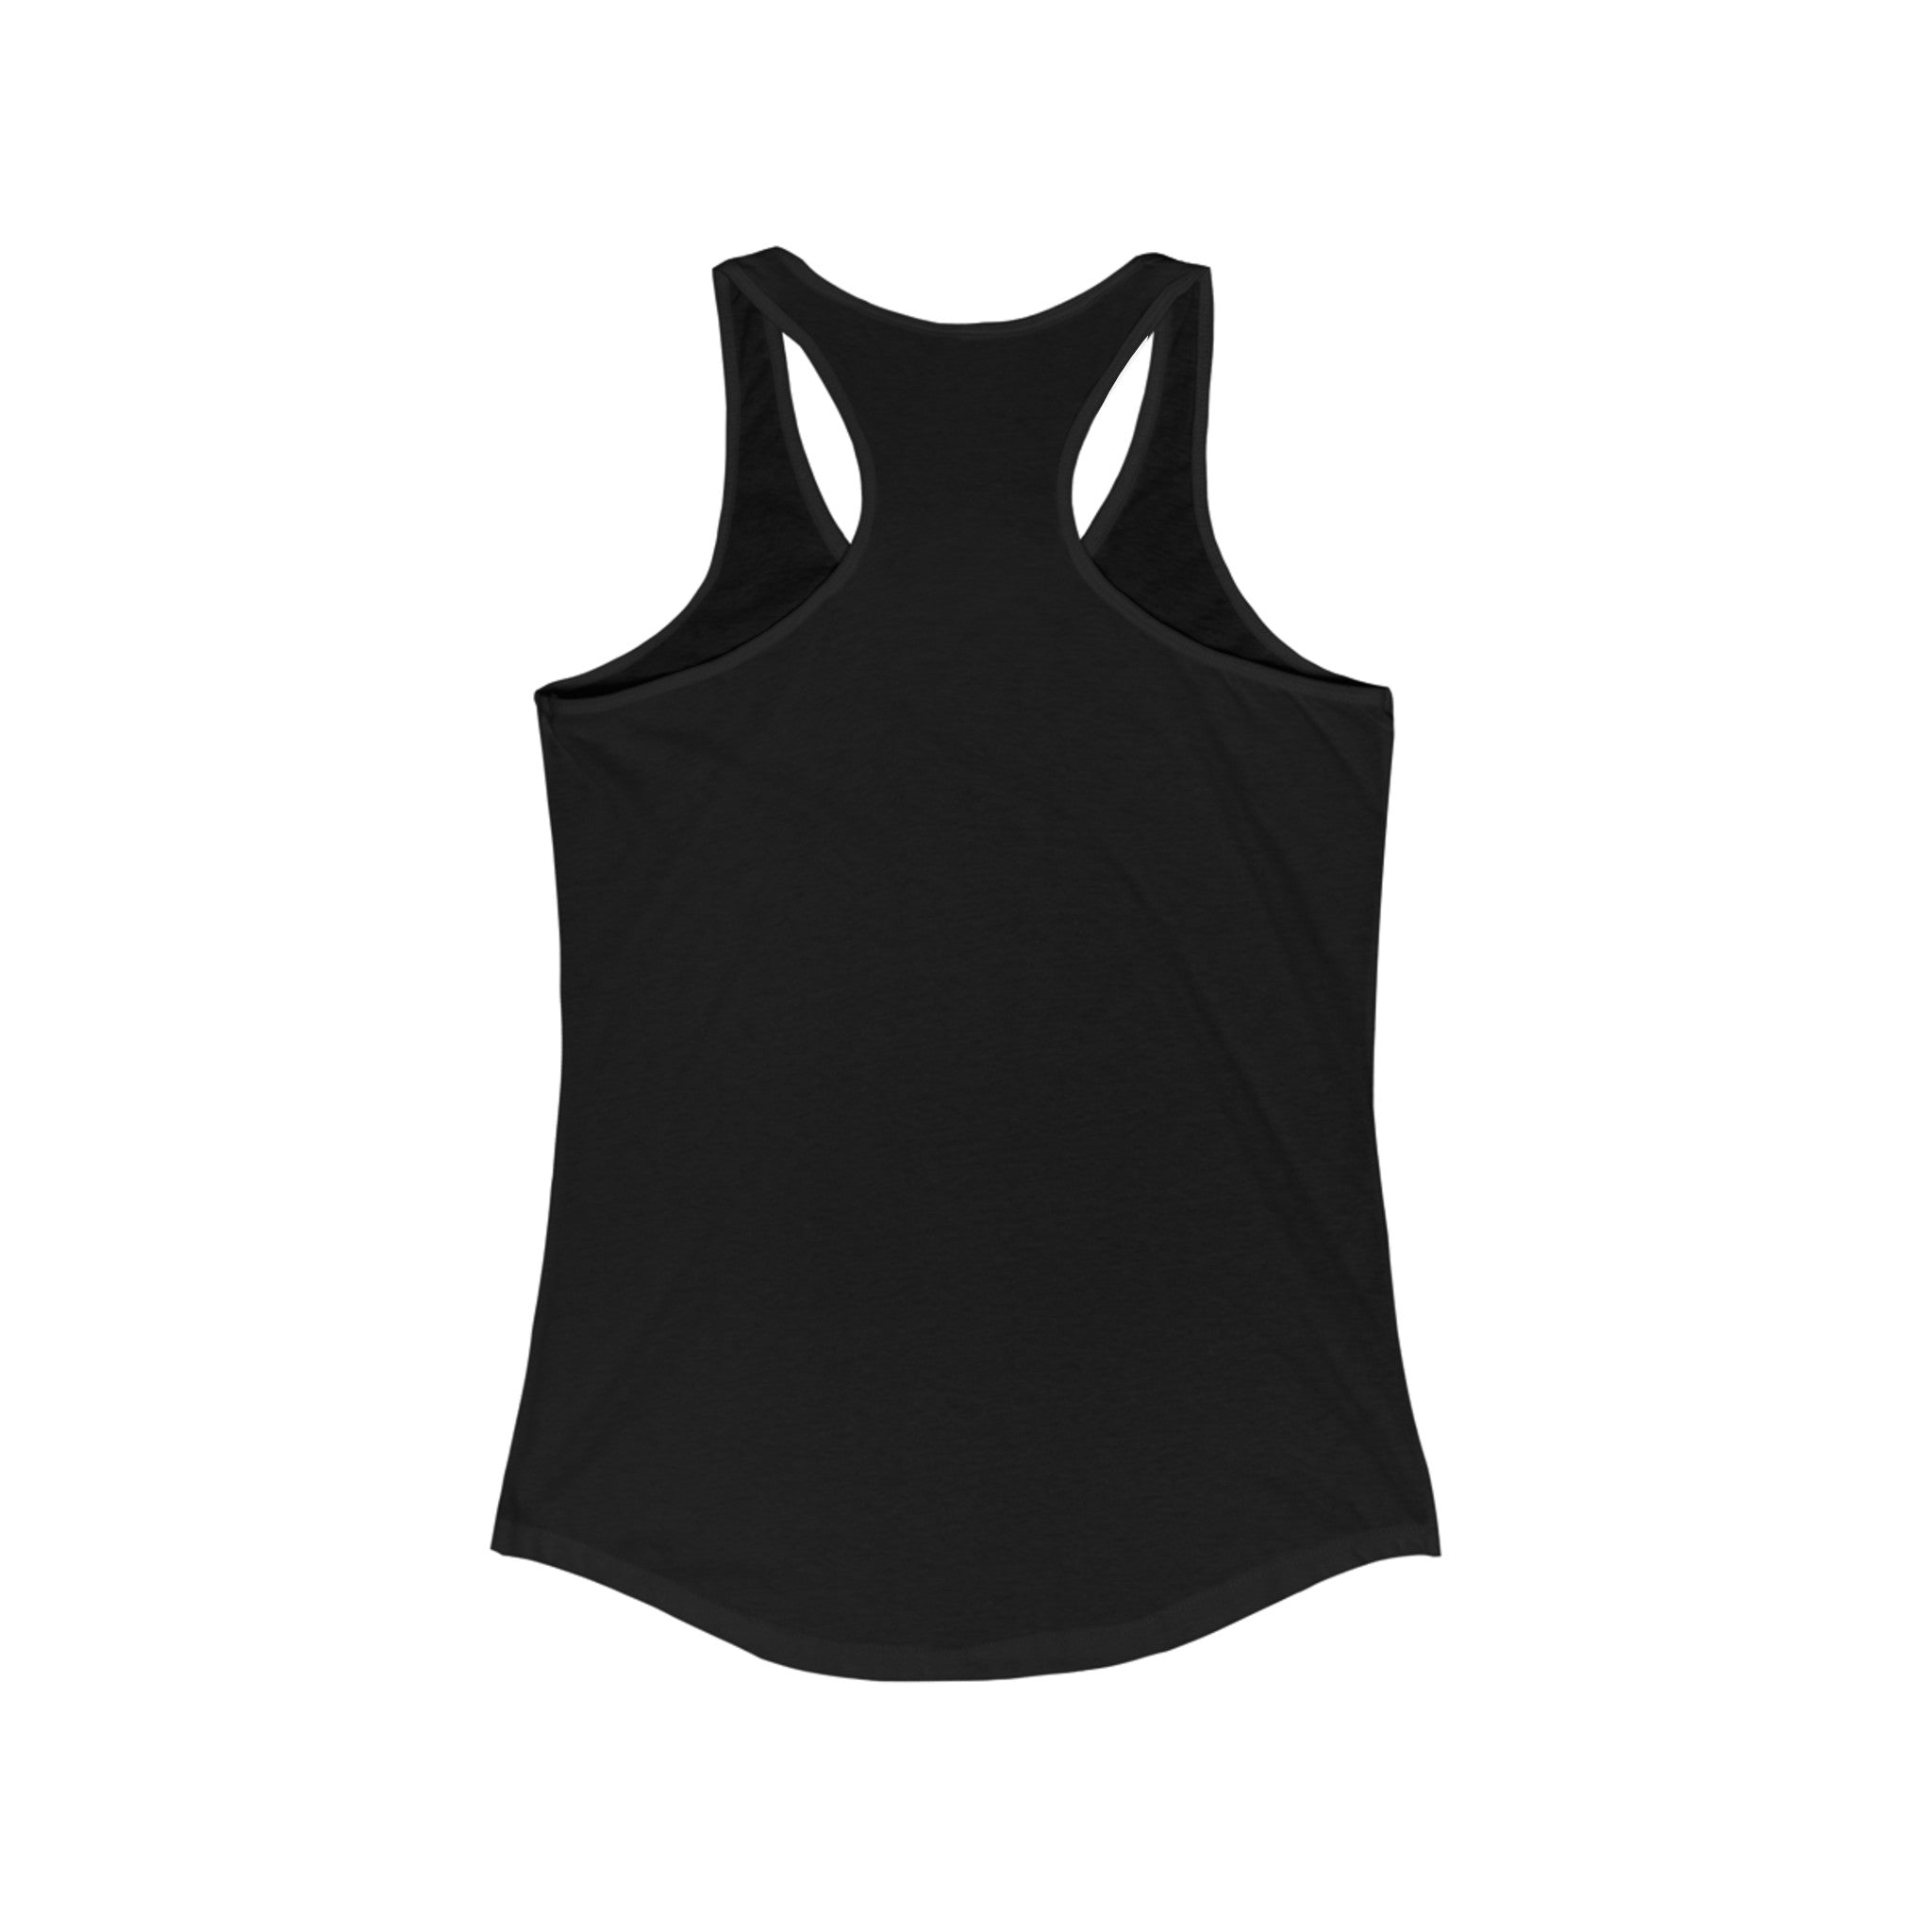 Love My Jobs - Women's Racerback Tank with a simple design, shown from the back, perfect for an active life.